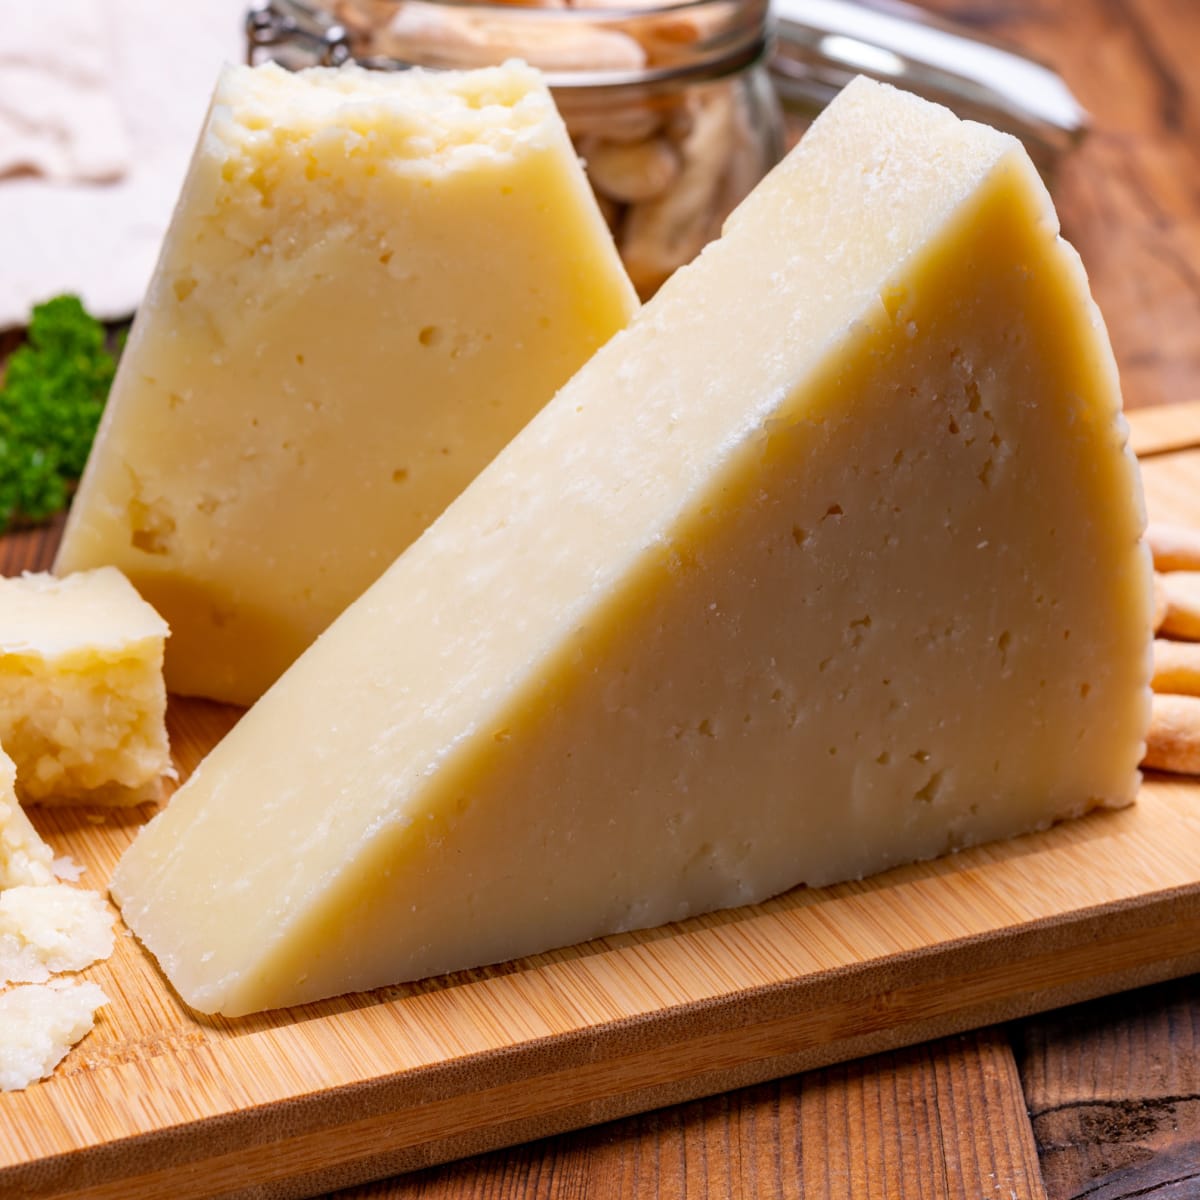 Slices of Matured Pecorino Romano Cheese on a Wooden Cutting Board